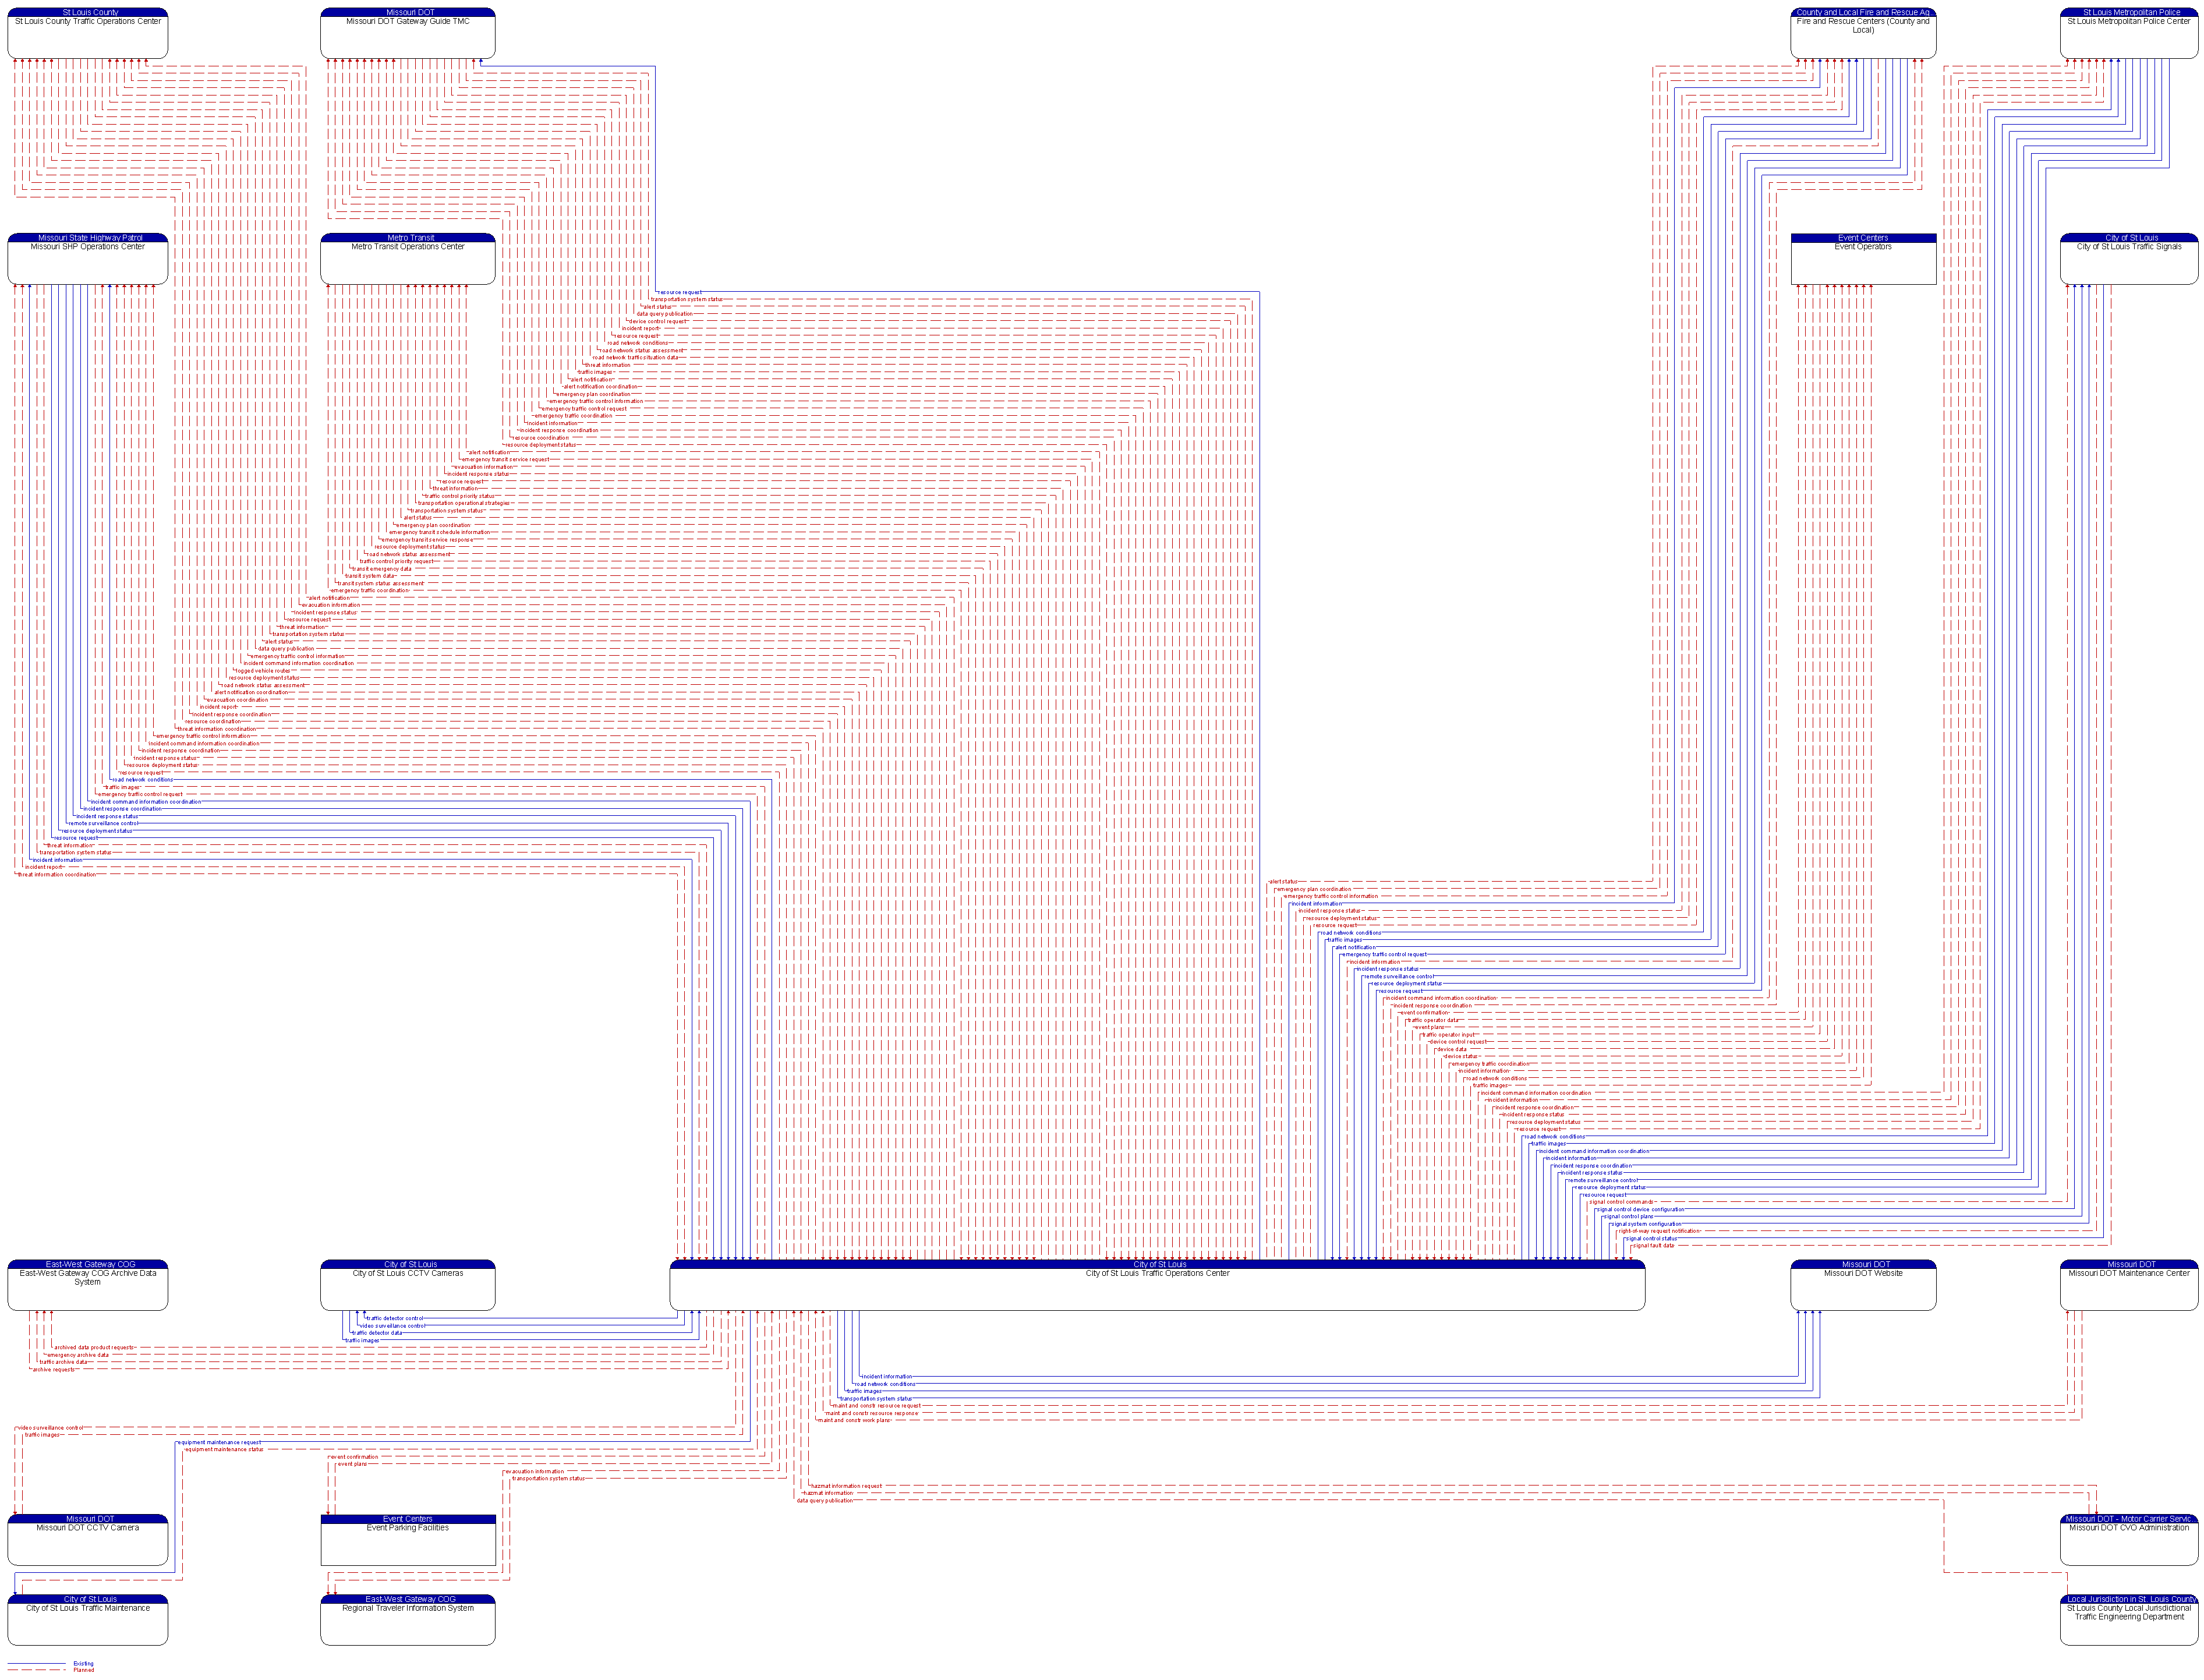 Context Diagram - City of St Louis Traffic Operations Center